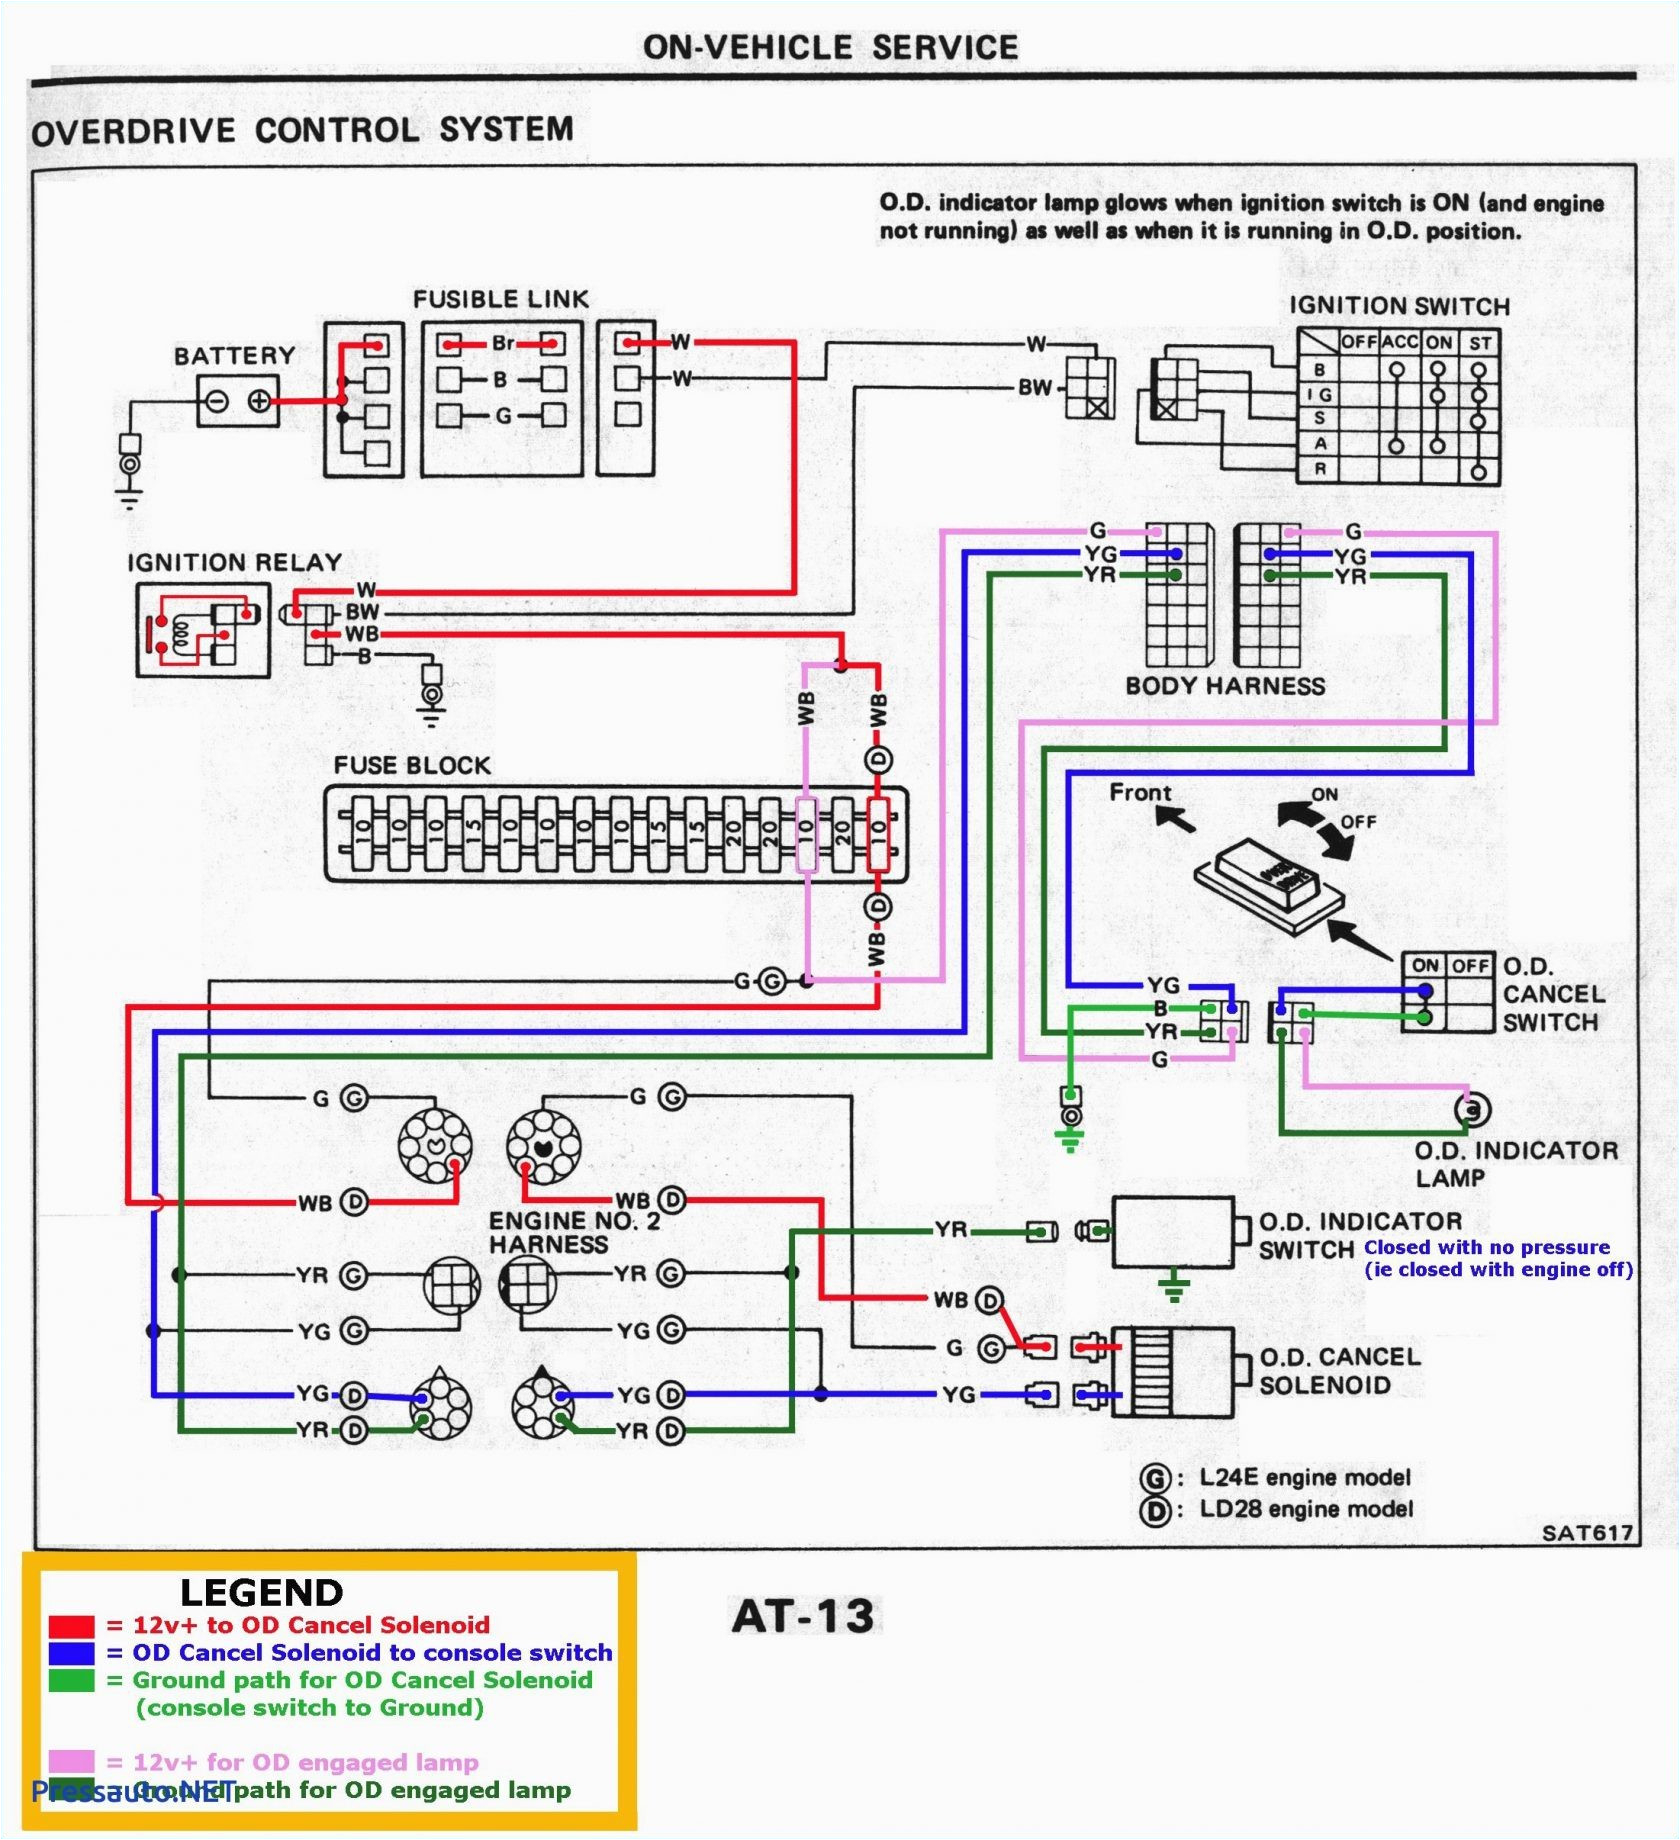 Plow Lights Wiring Diagram Agm Ignition Switch Wiring Wiring Diagram Operations